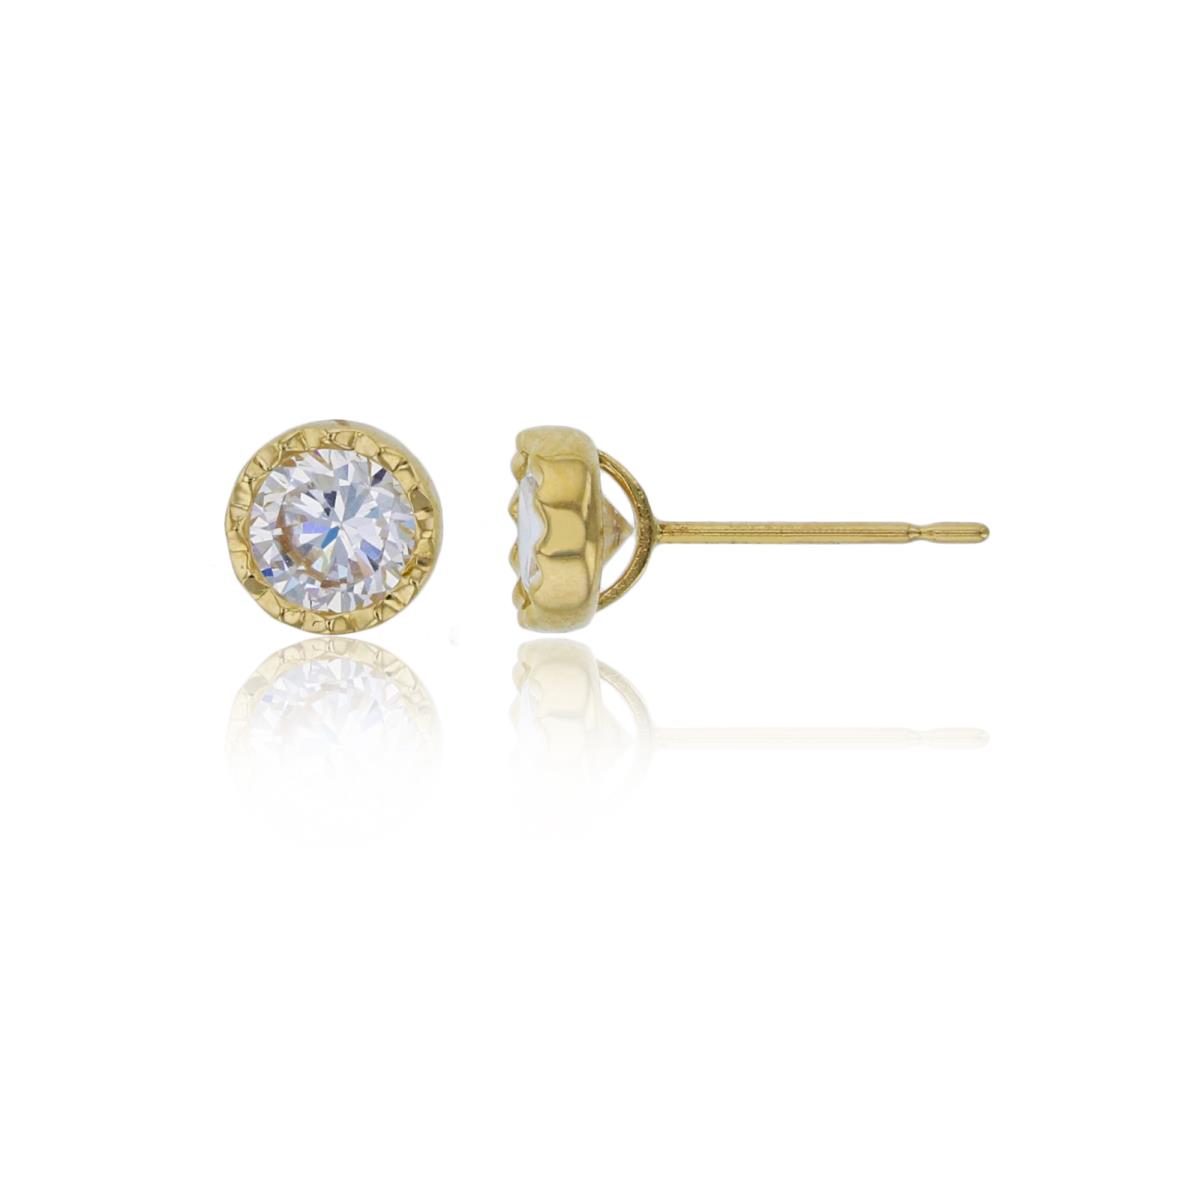 14K Yellow Gold 5mm Round Cut DC Stud Earring